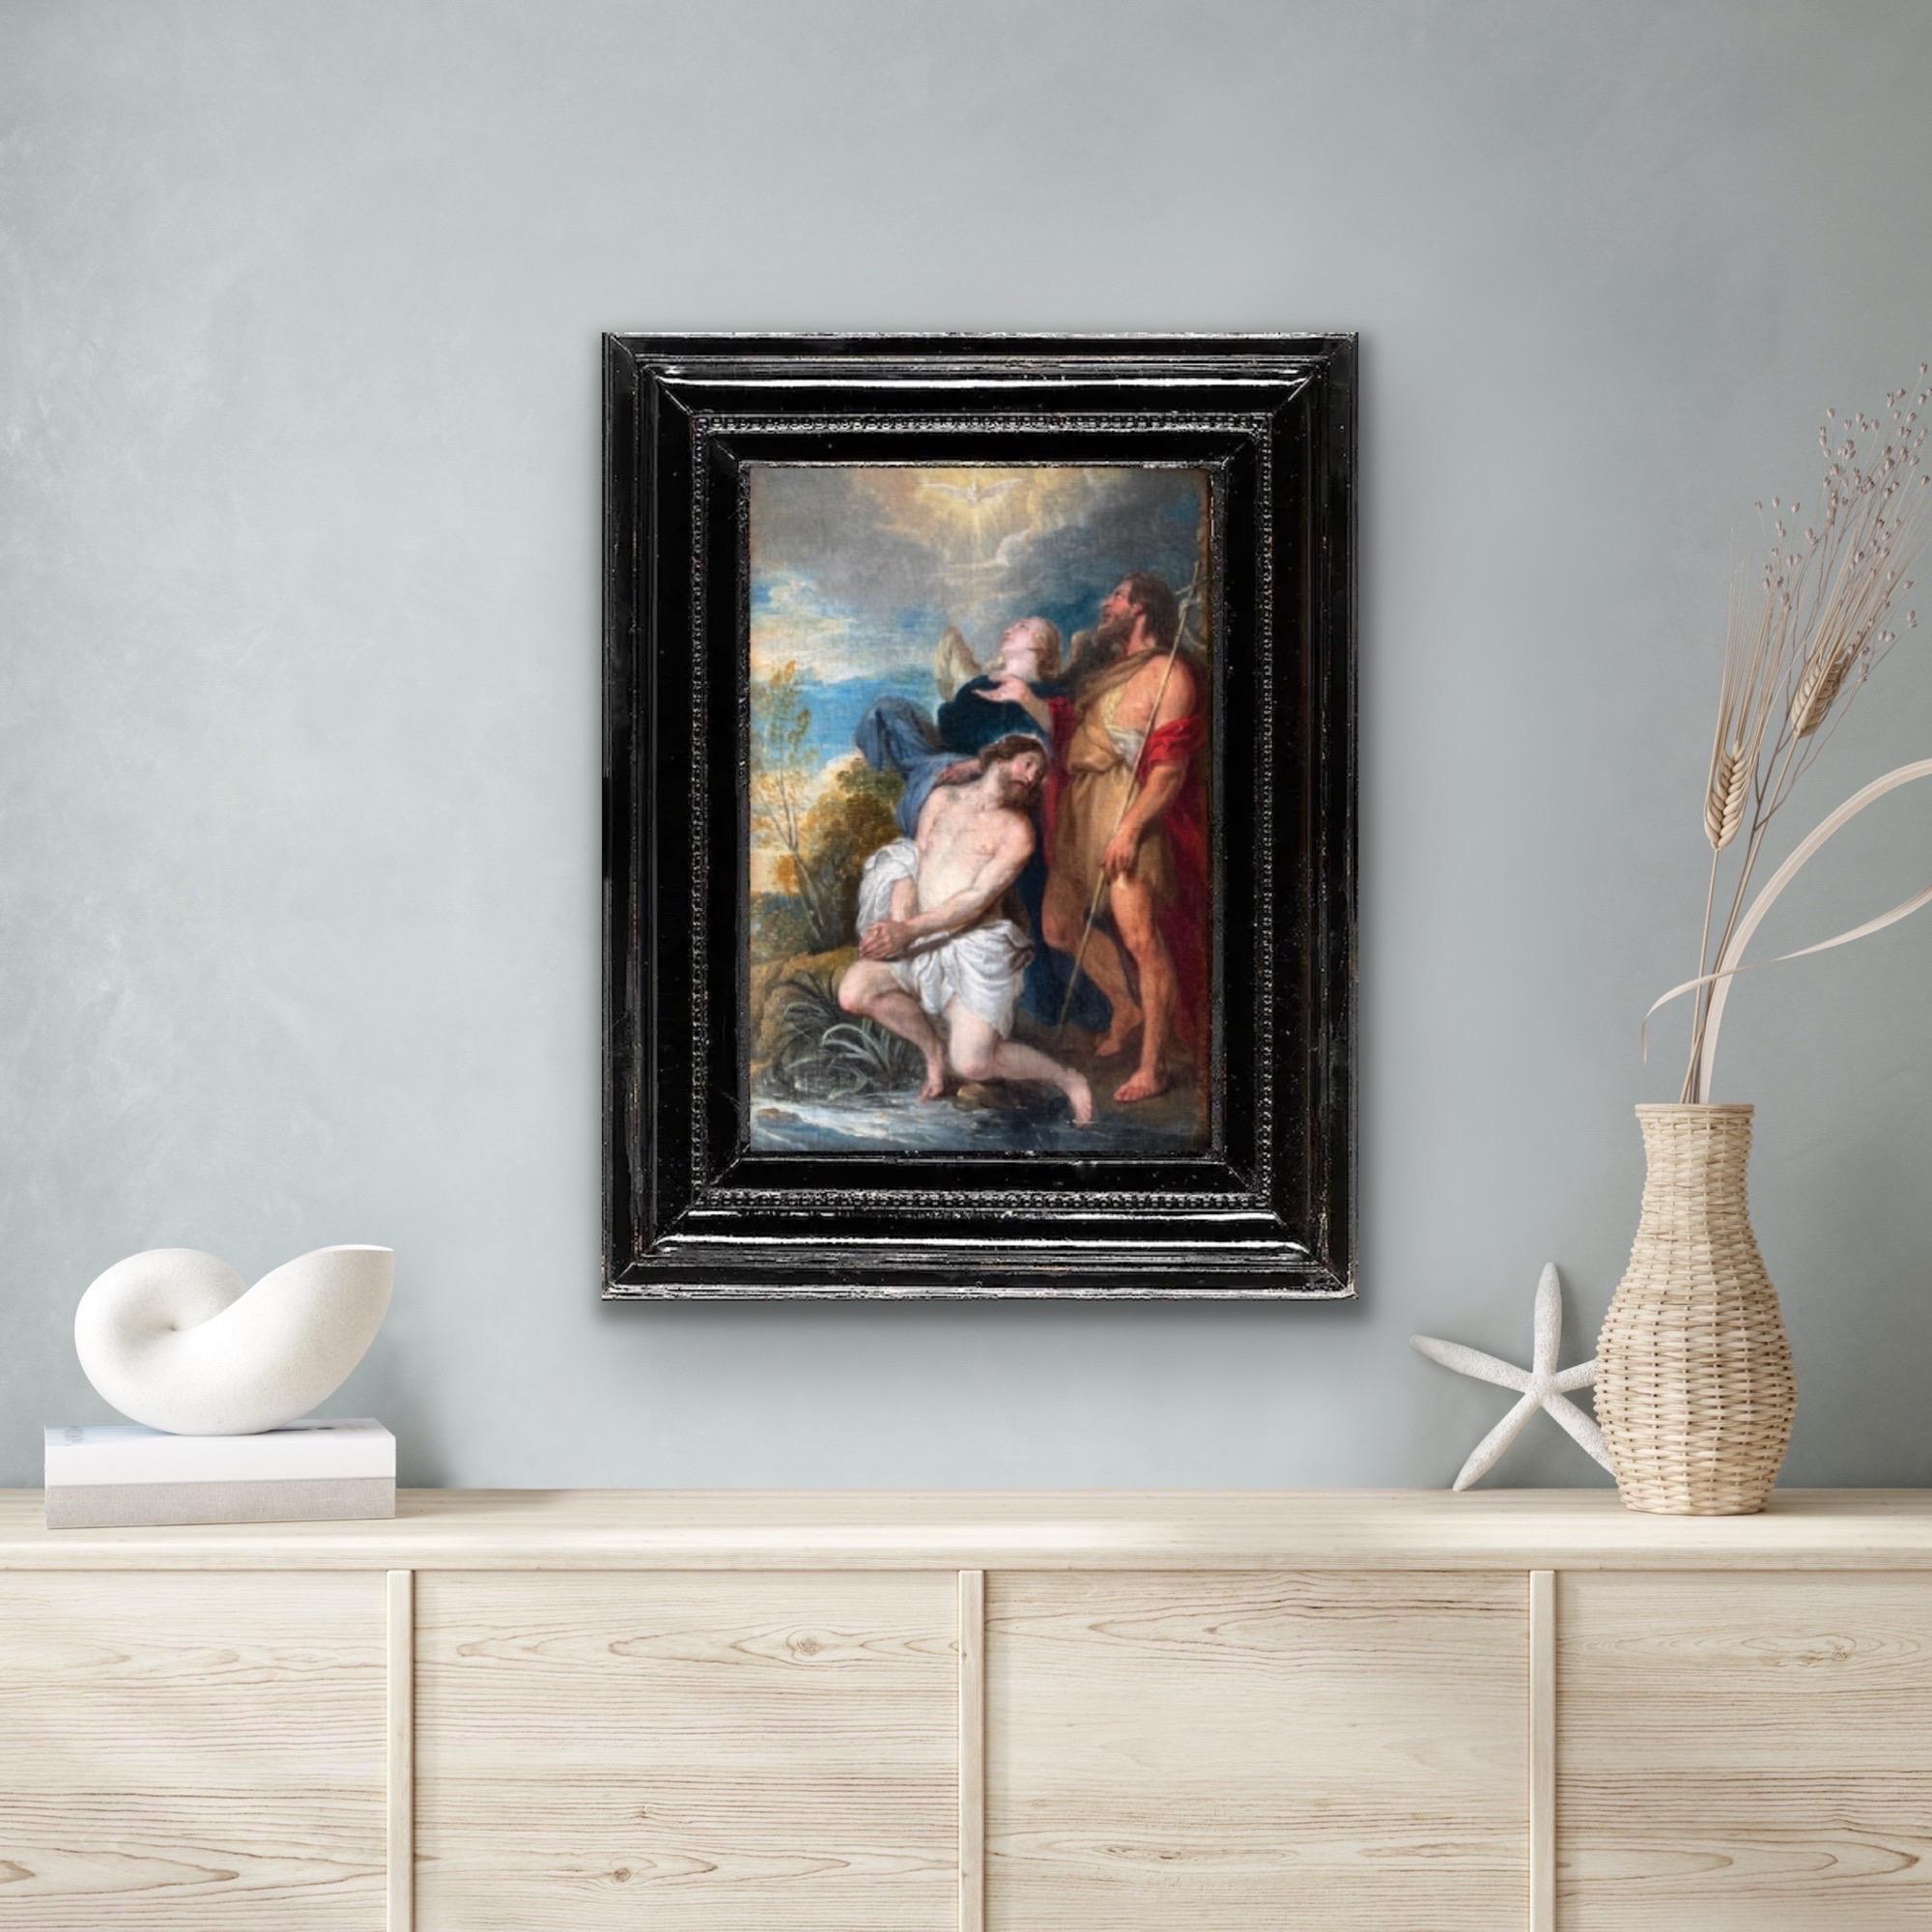 17th century Flemish Italian Old Master - The baptism of Christ - Religious For Sale 3